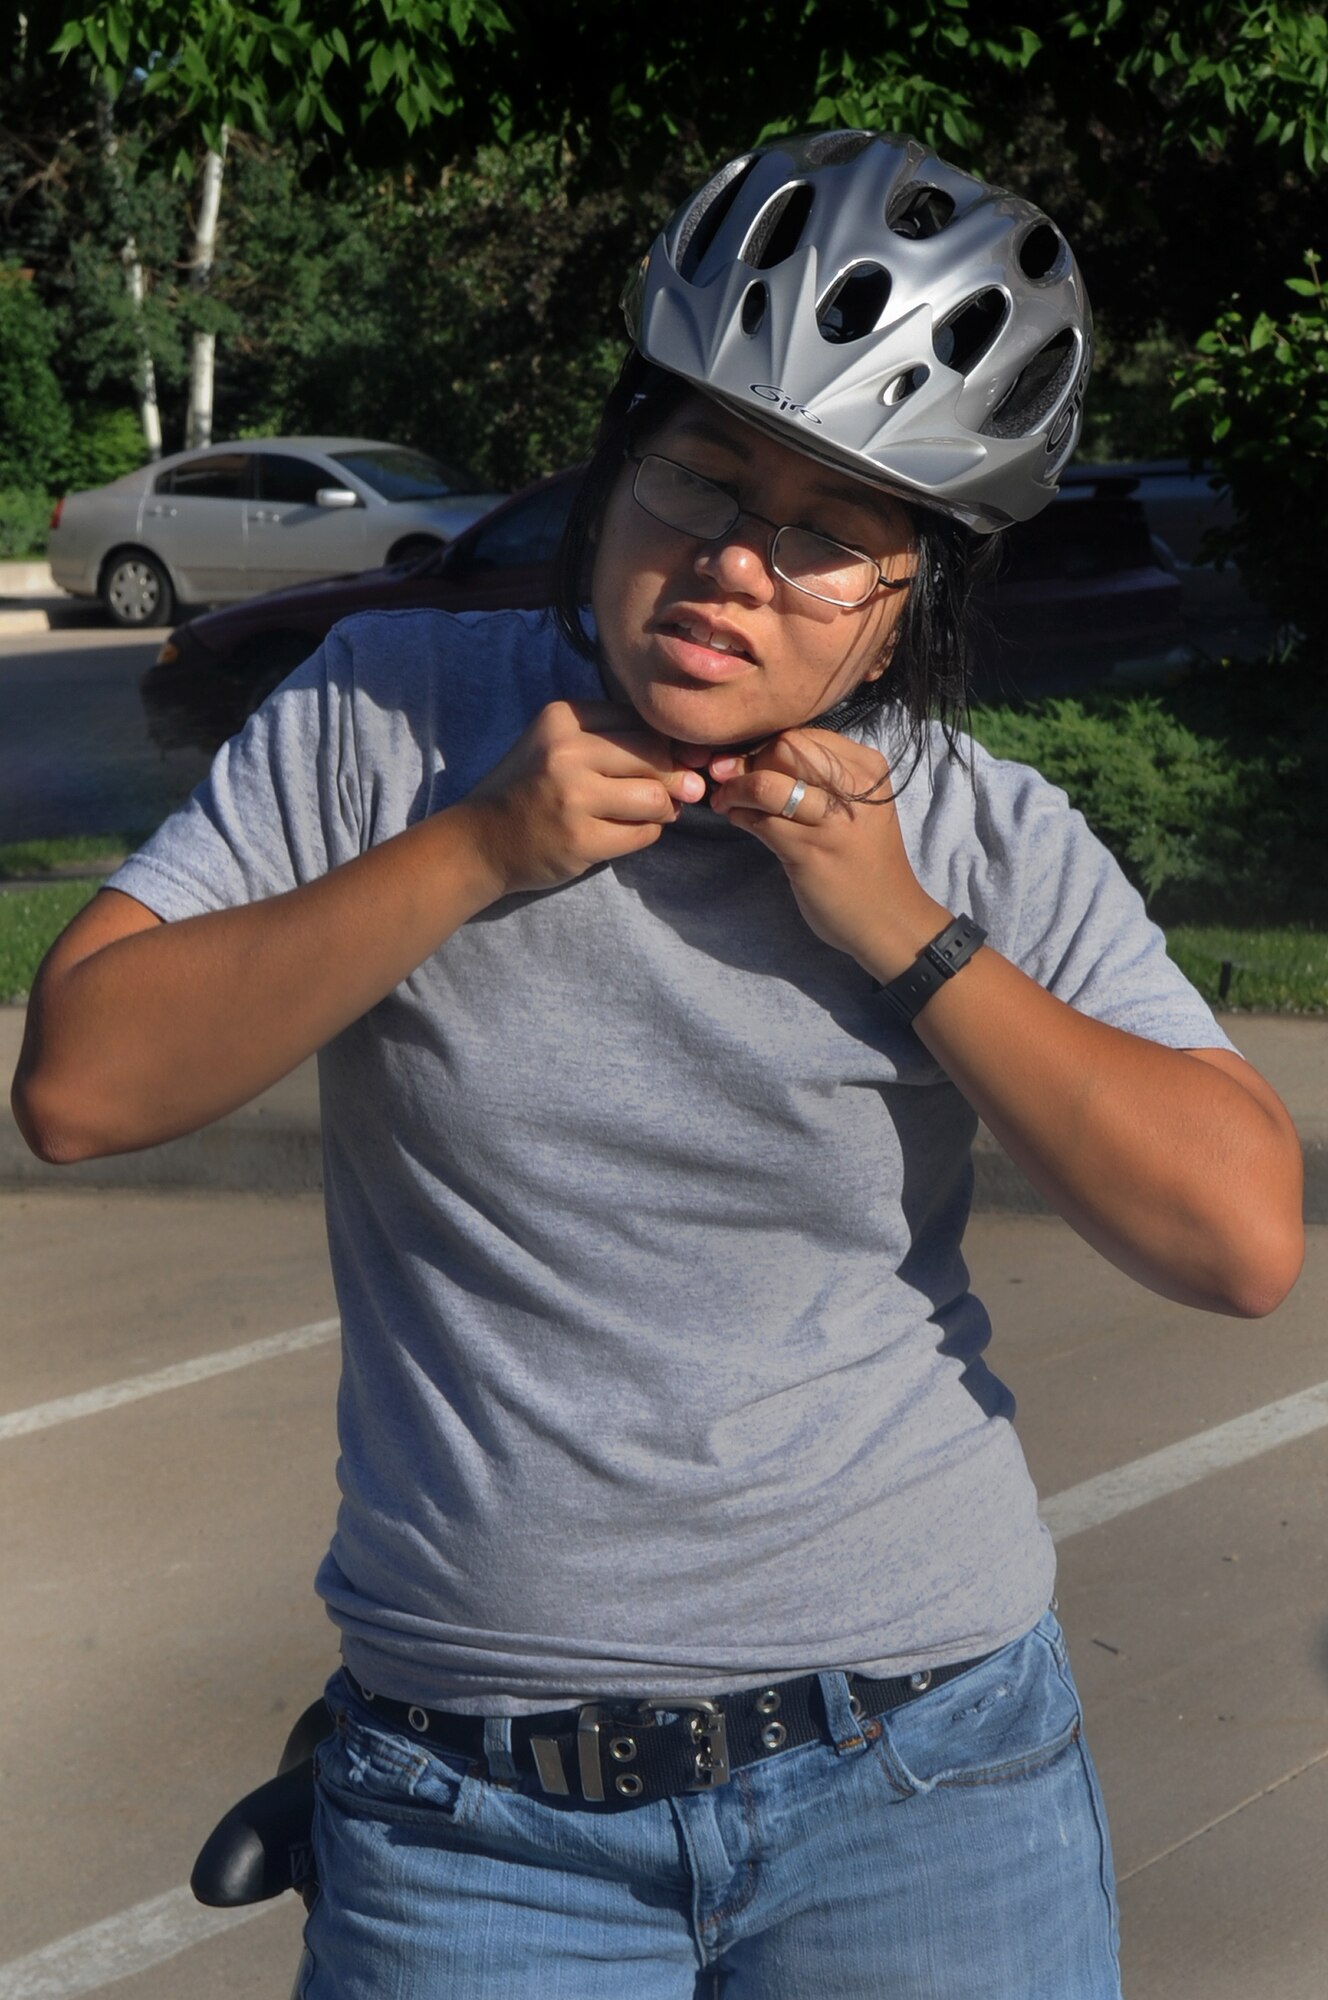 DENVER, Colo. -- Staff Sgt. Kathrine McDowell gears up to ride her bicycle by protecting herself and putting on her helmet June 22. Sergeant McDowell uses a helmet every time she rides a bike. (U.S. Air Force Photo by Airman 1st Class Manisha Vasquez) 